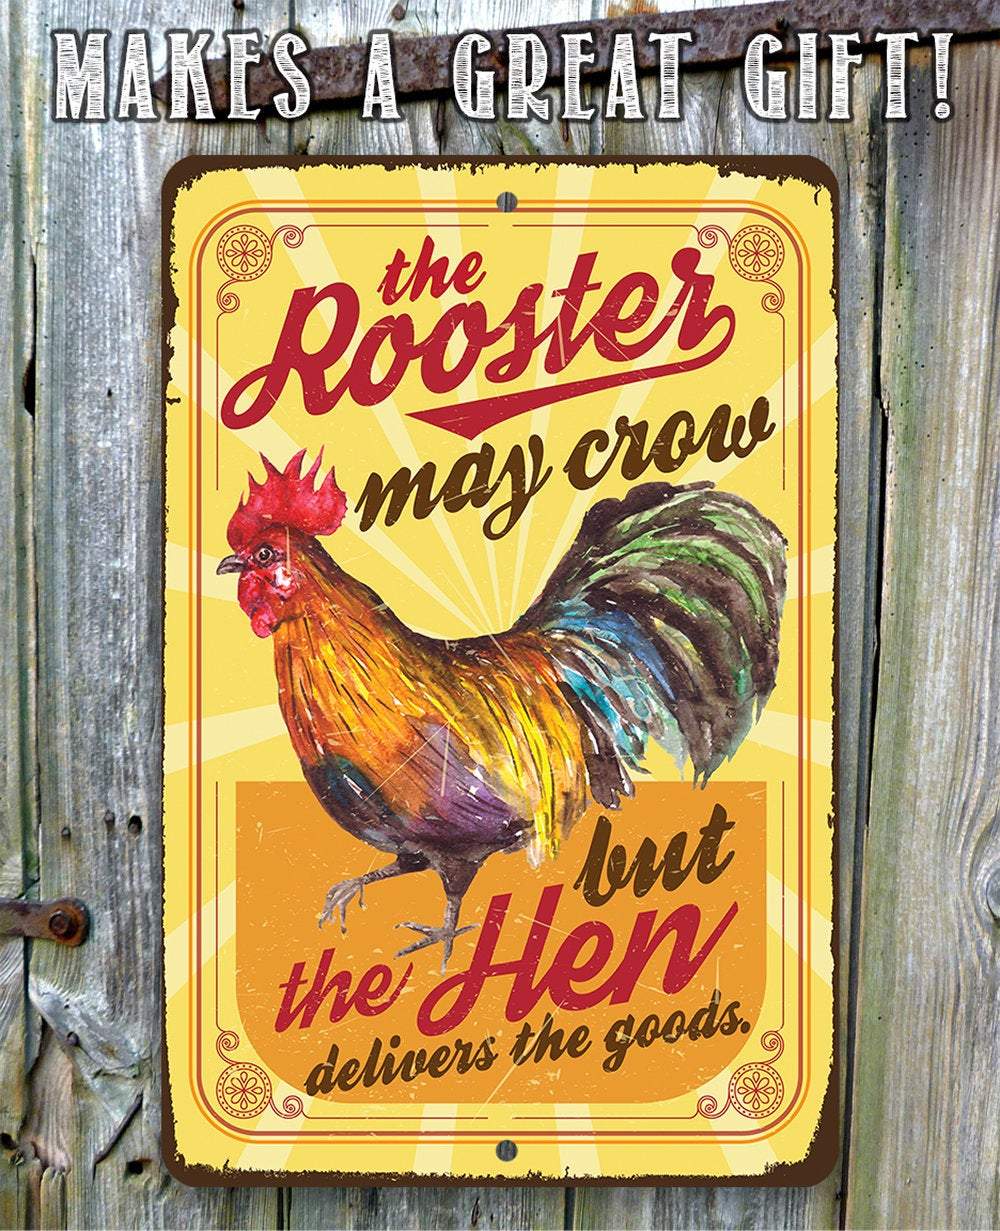 The Rooster May Crow - Metal Sign | Lone Star Art.